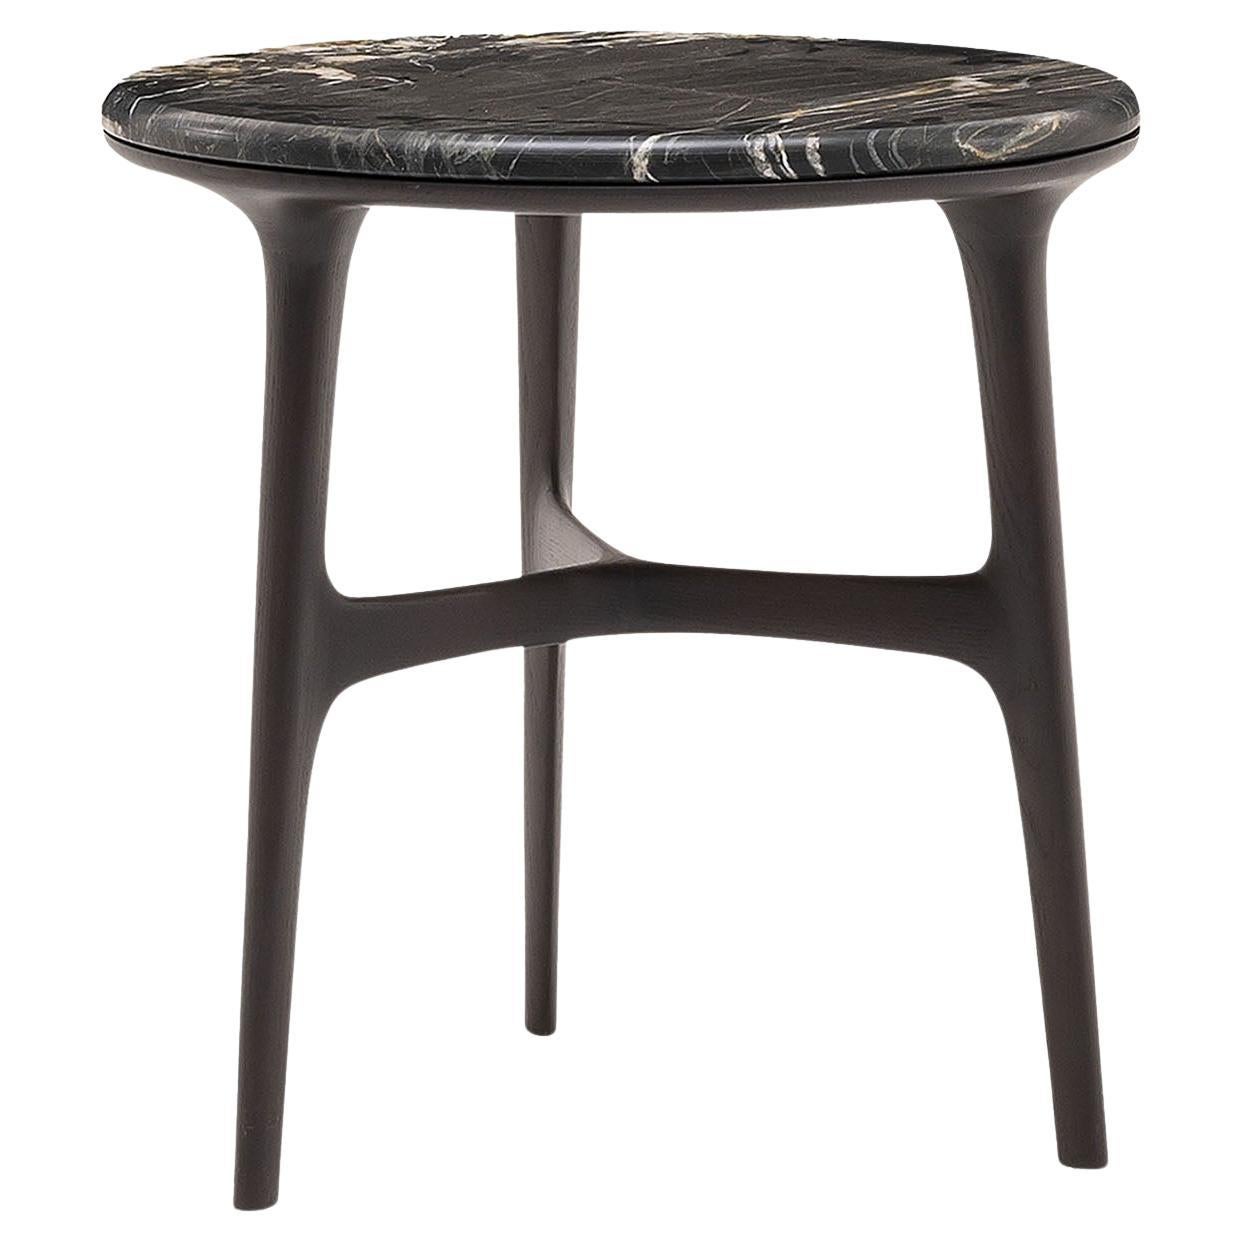 ED/50 422 Sirio Side Table For Sale